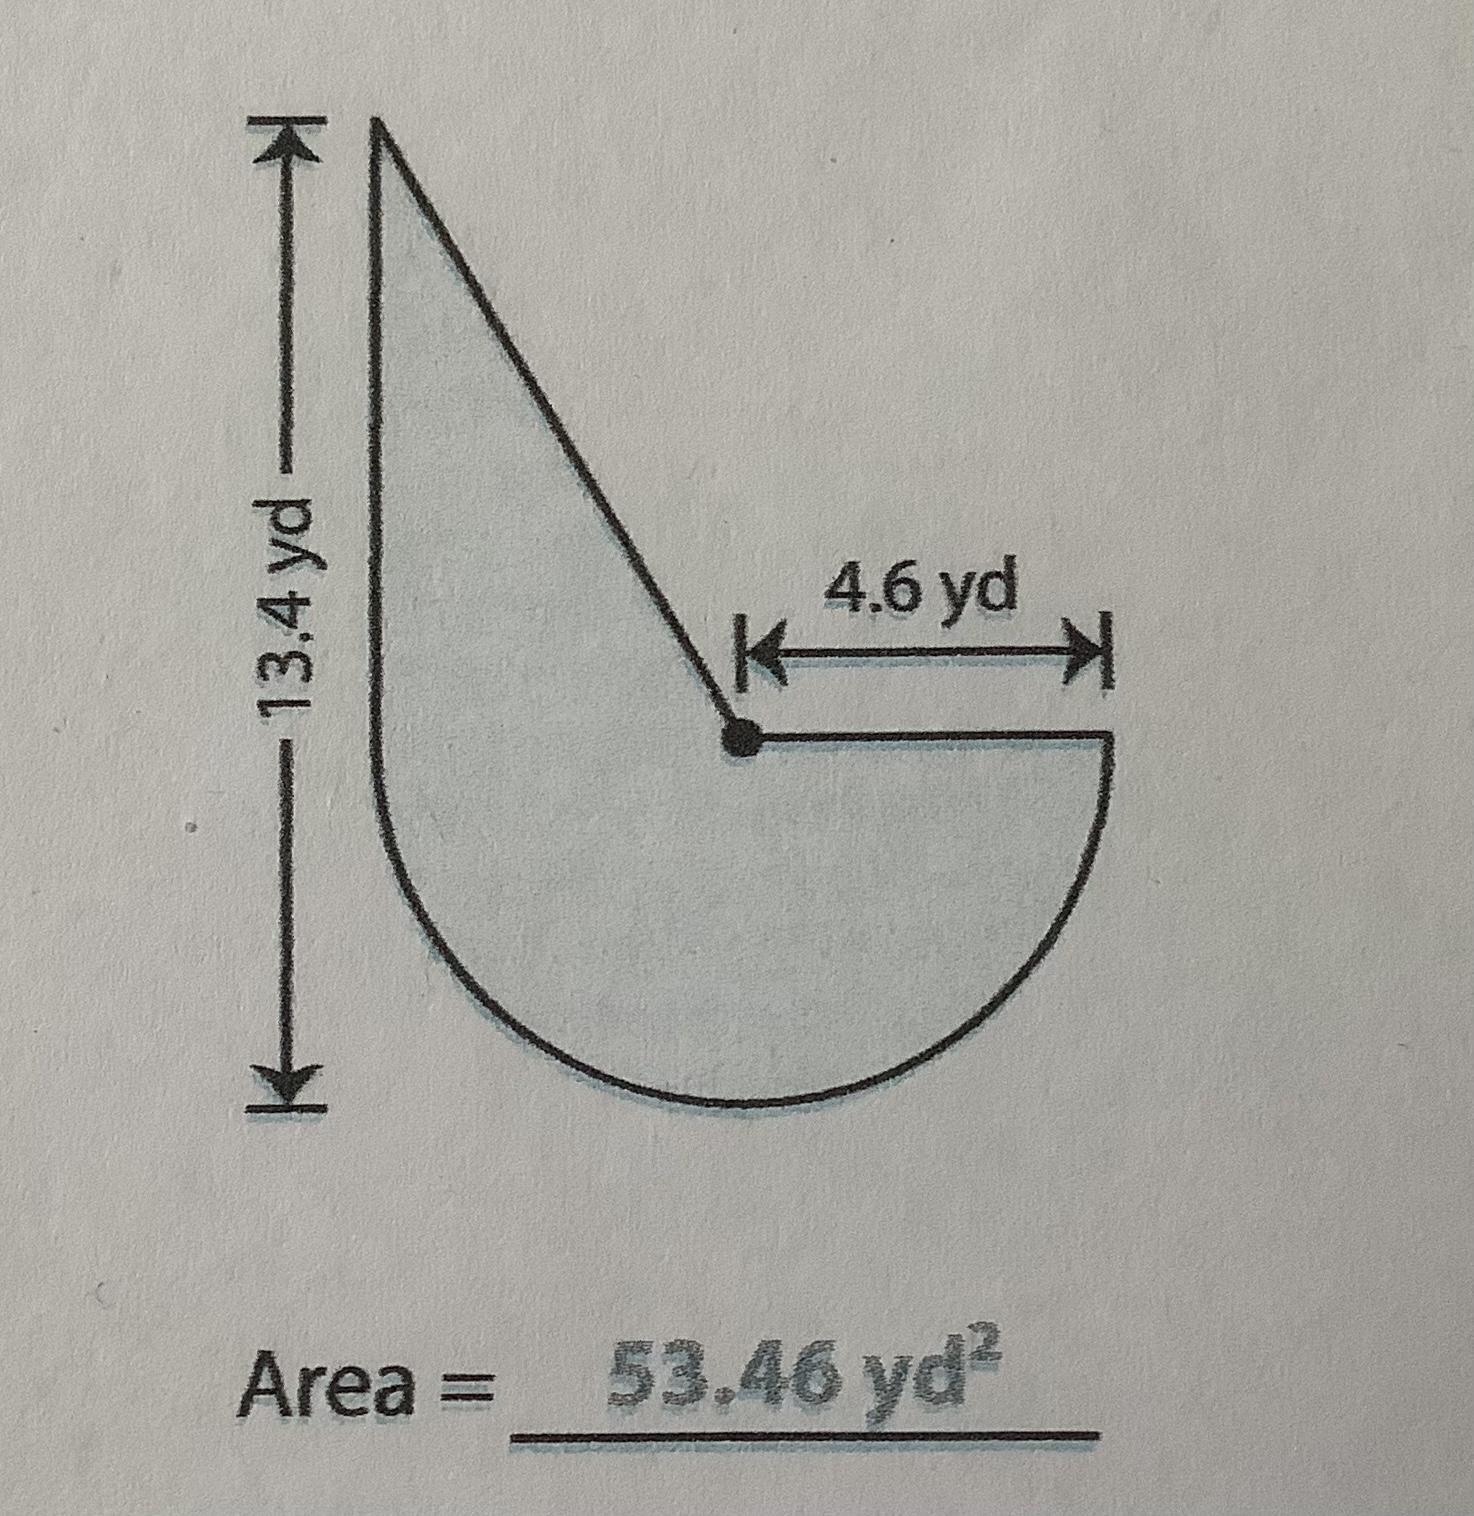 Find The Area Of The Compound Figure. Round Your Answer To 2 Decimal Places If Required. (Use = 3.14)Hello!